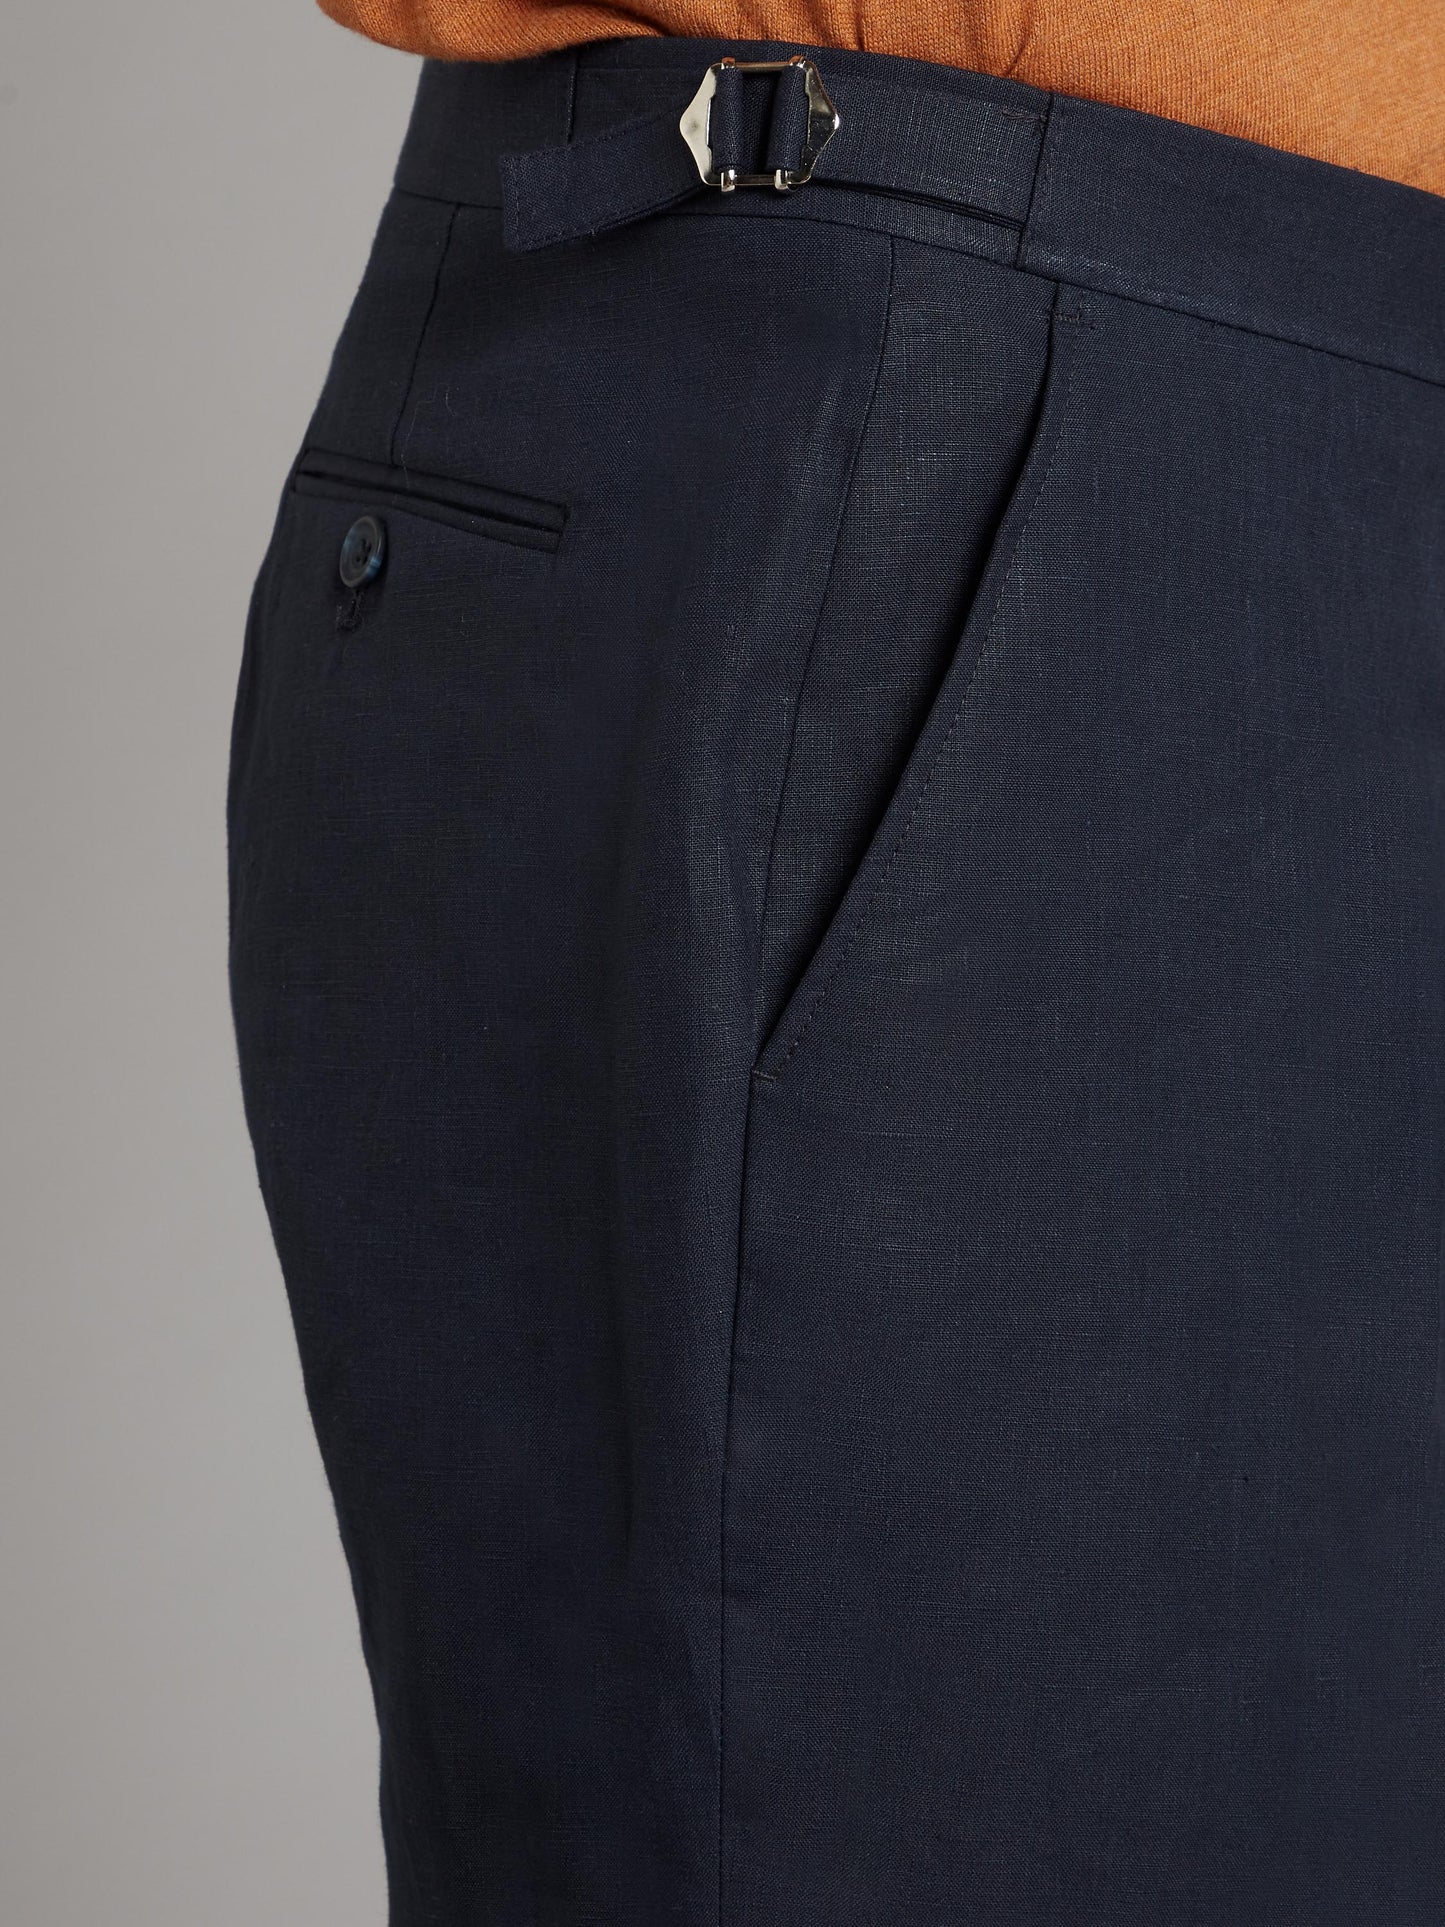 Flat Front Linen Trousers - Navy